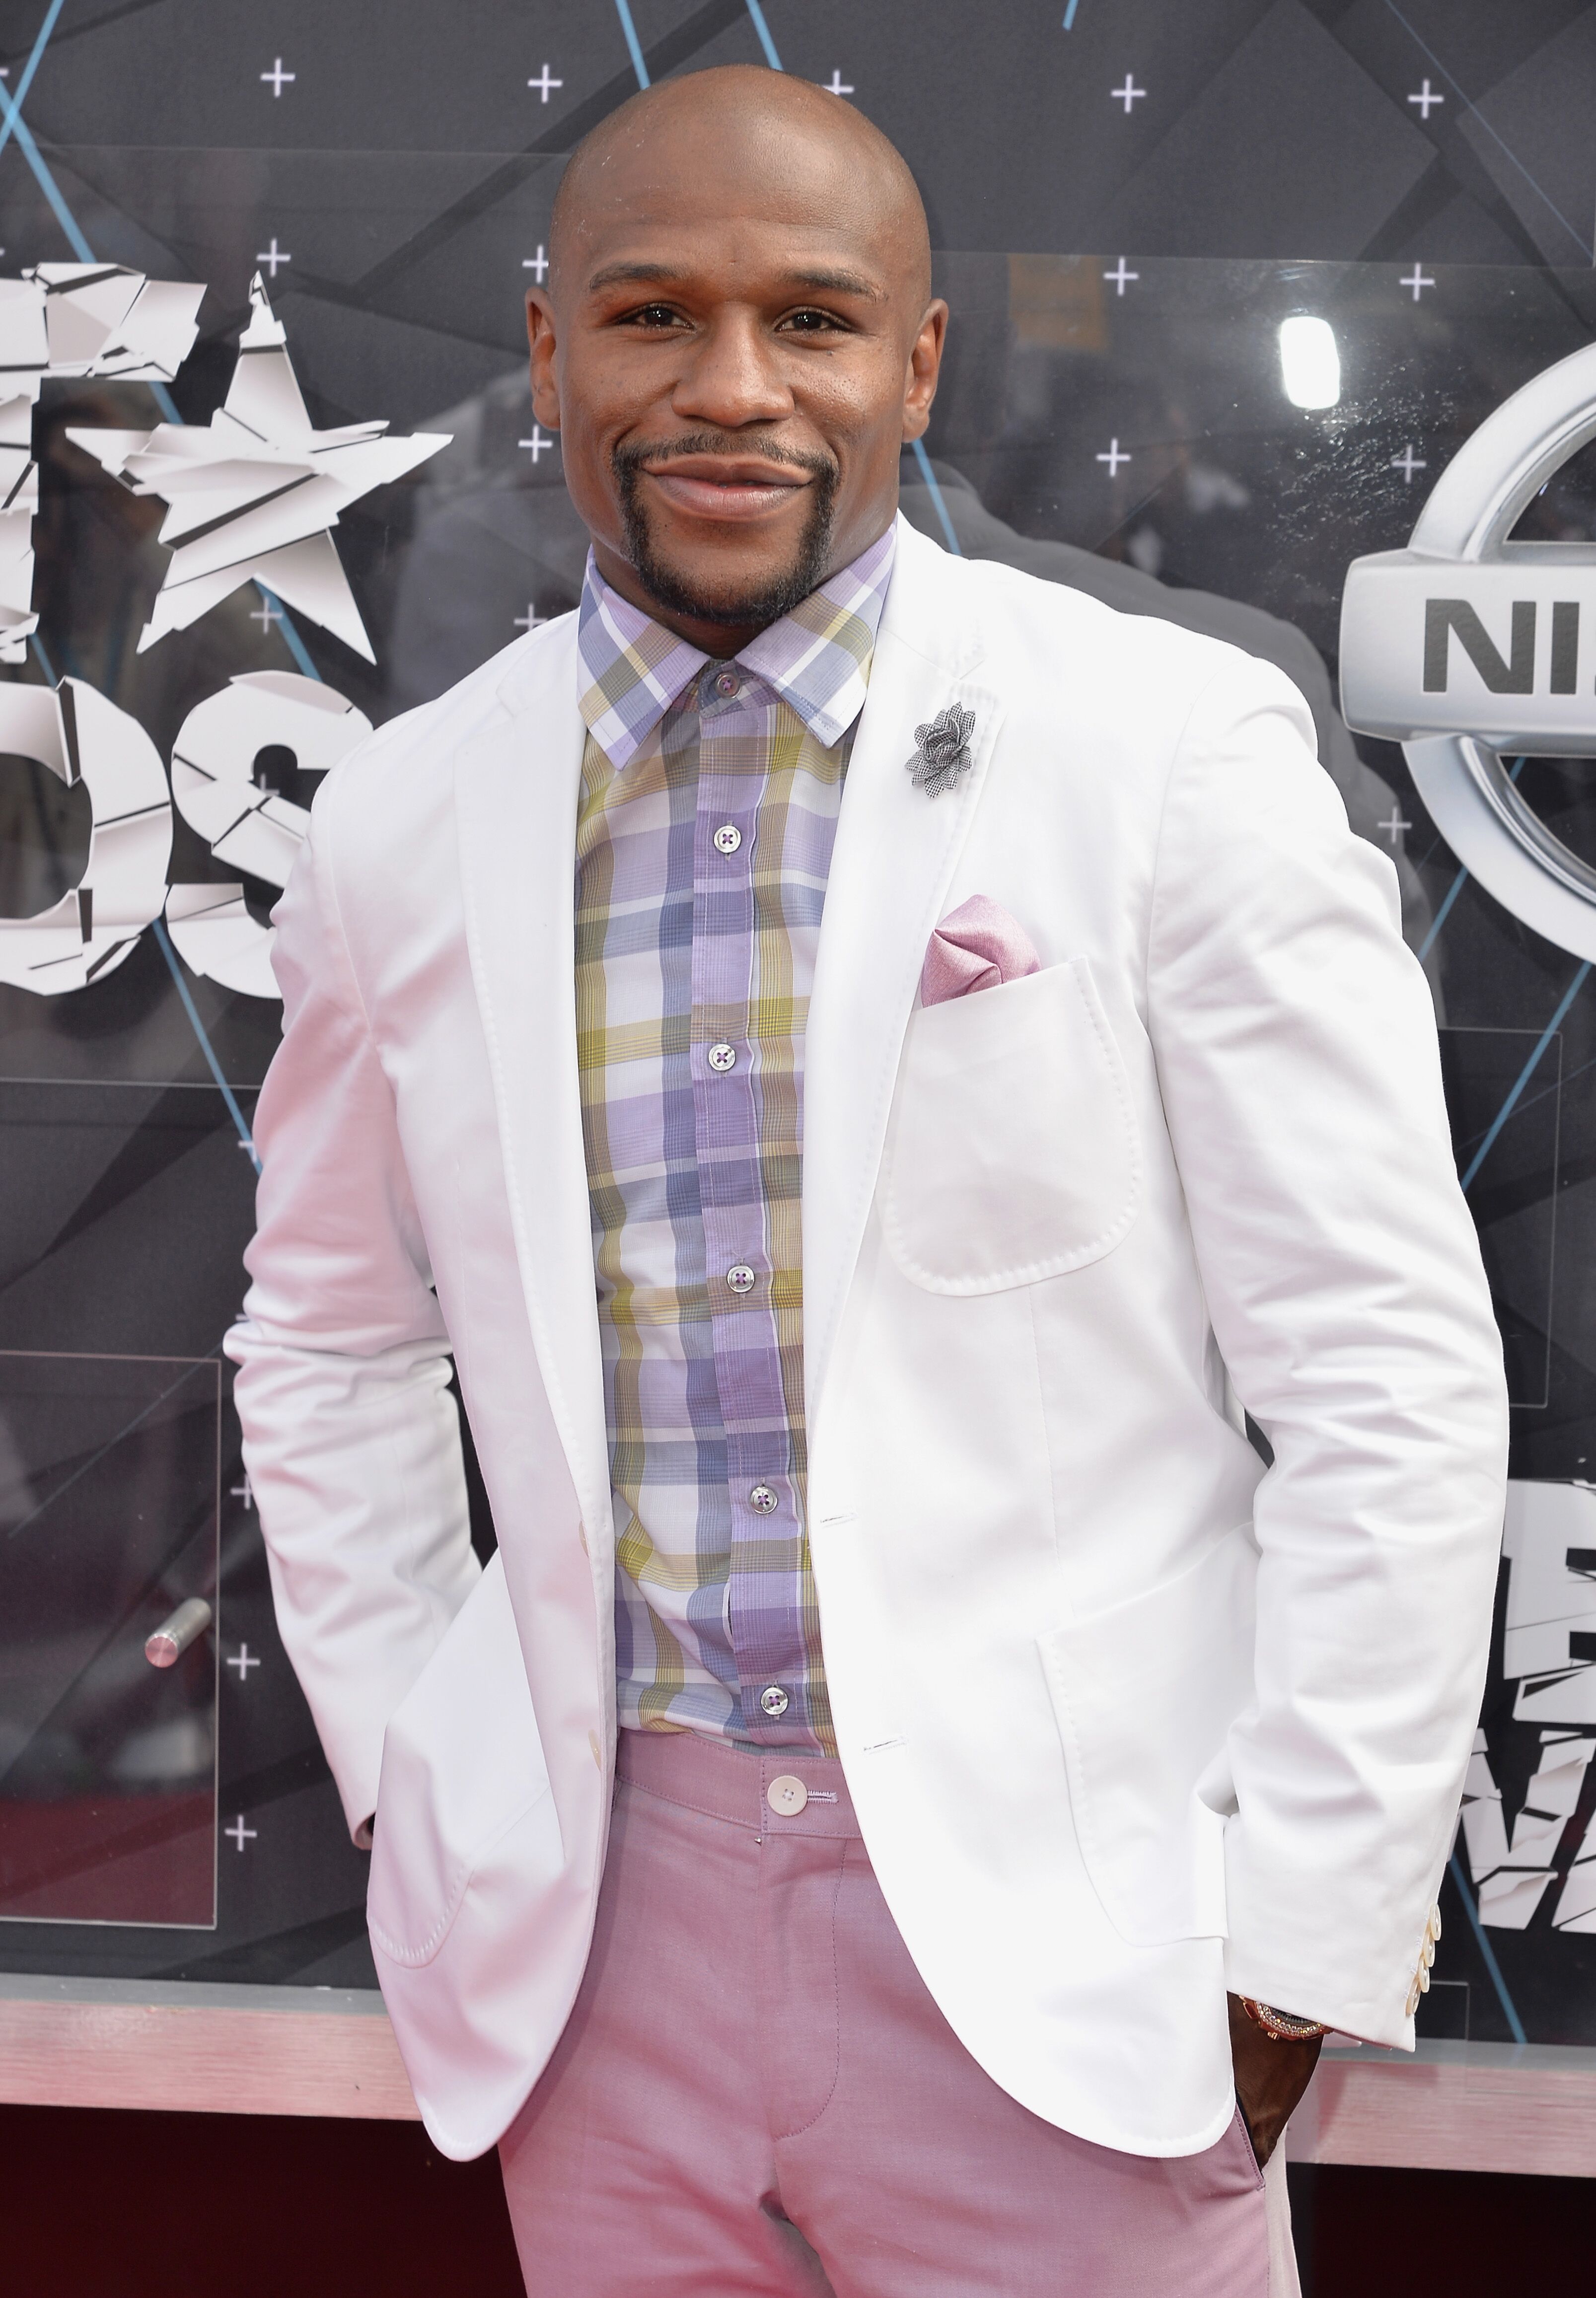 Floyd Mayweather, Jr. attends the 2015 BET Awards at the Microsoft Theater on June 28, 2015 in Los Angeles, California. | Source: Getty Images